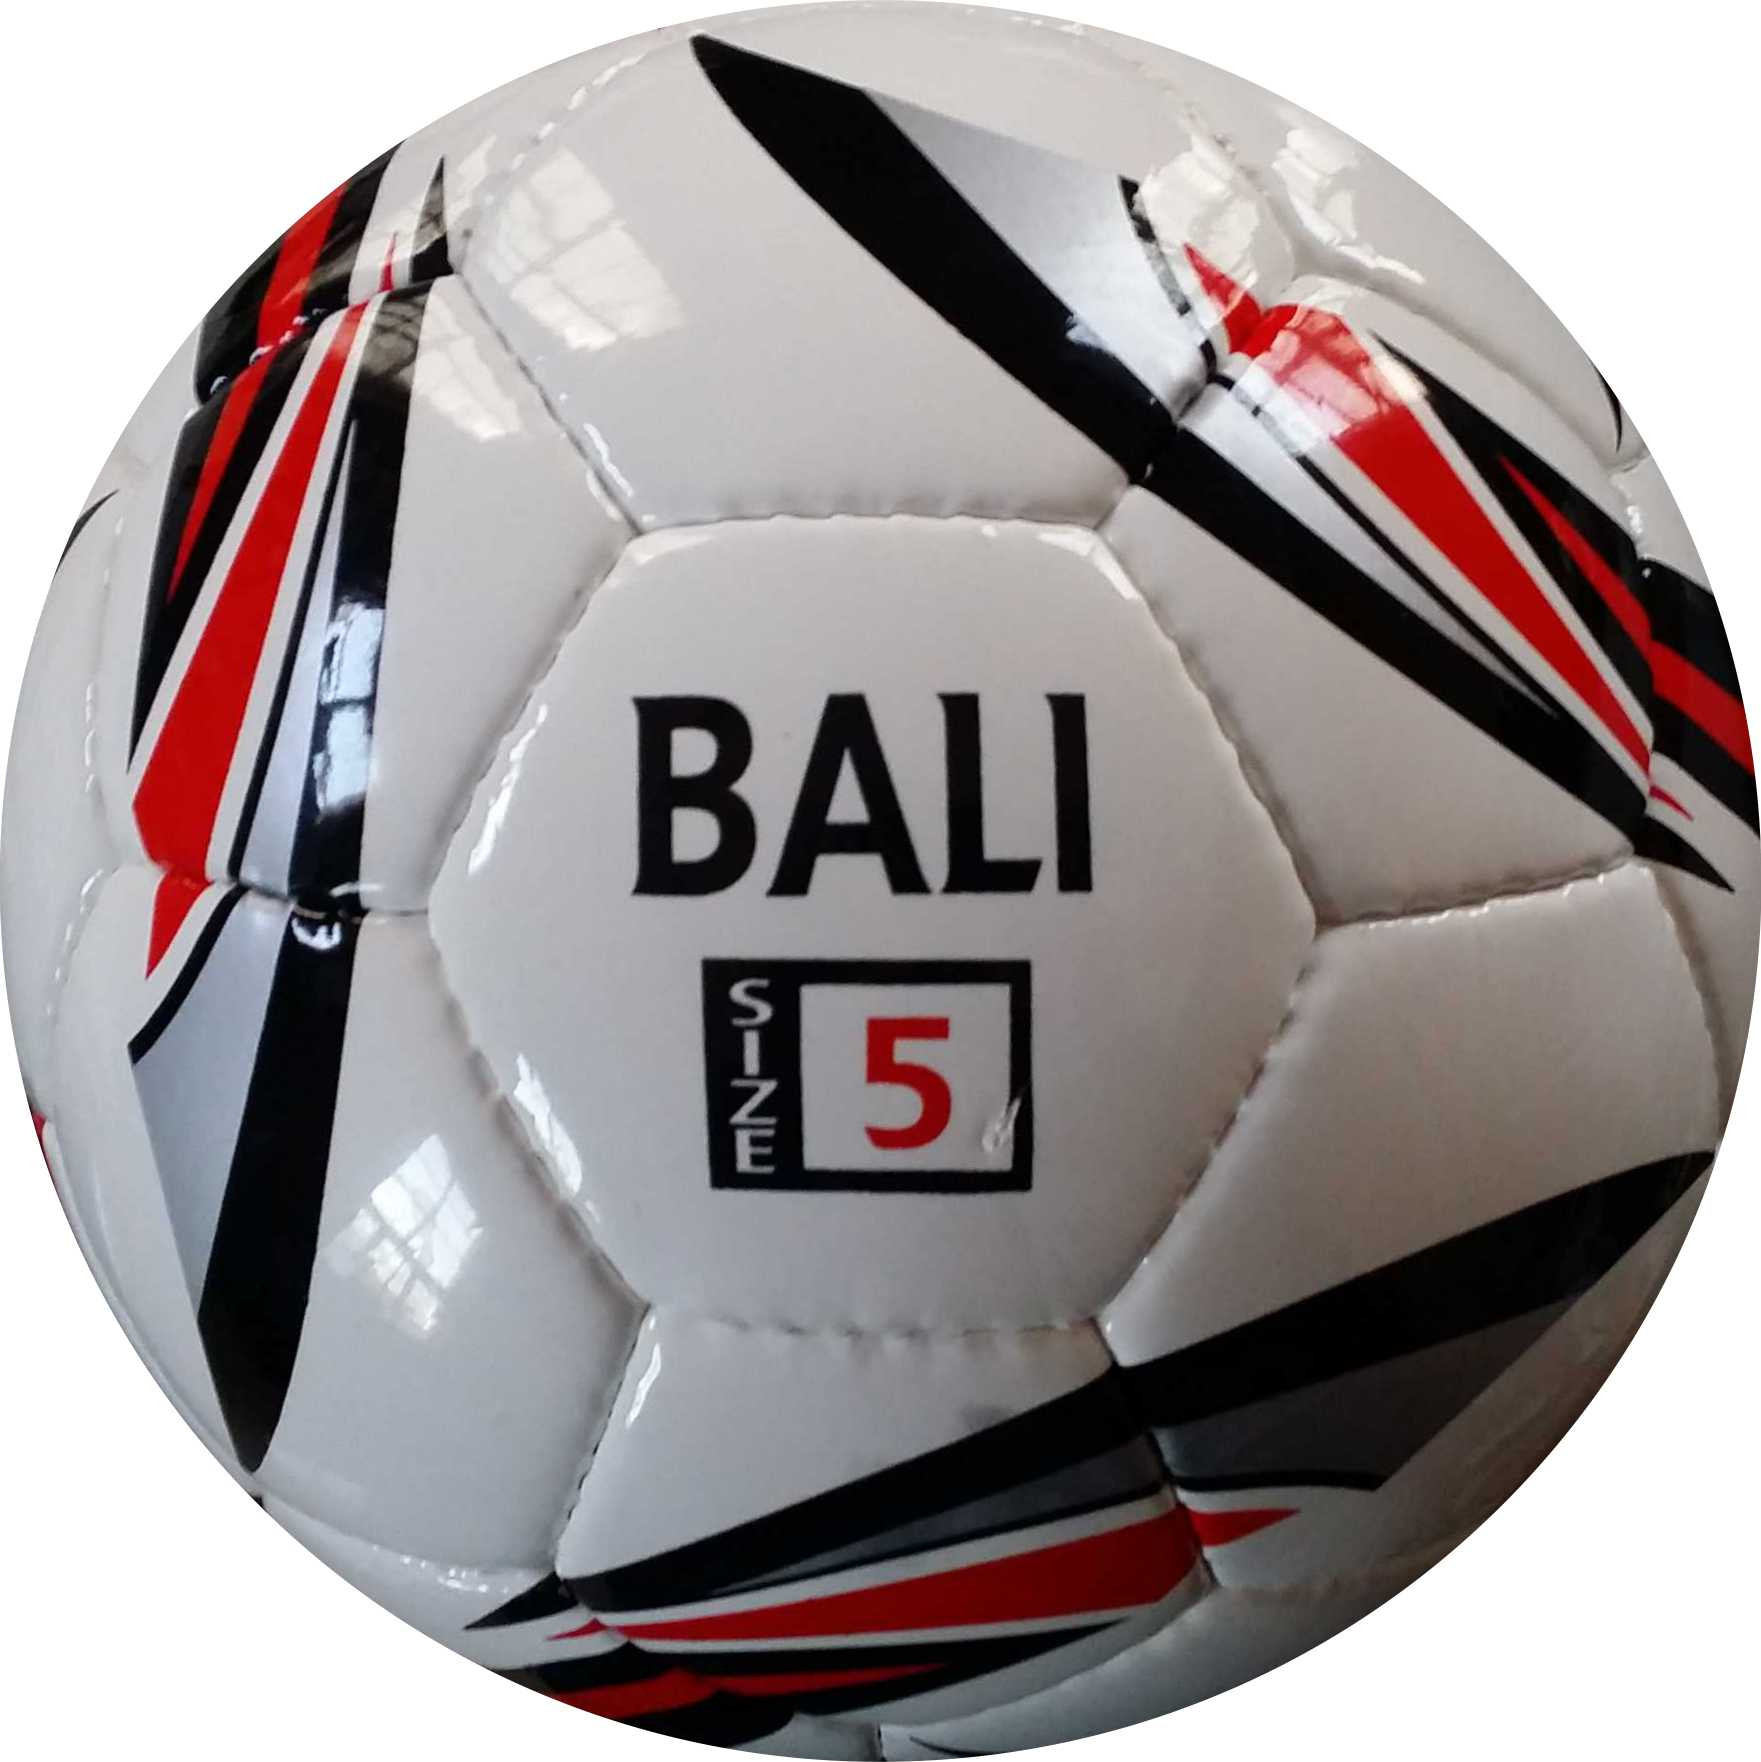 Perrini Bali White/ Black Indoor Outdoor Sports Soccer Training Ball Size 5